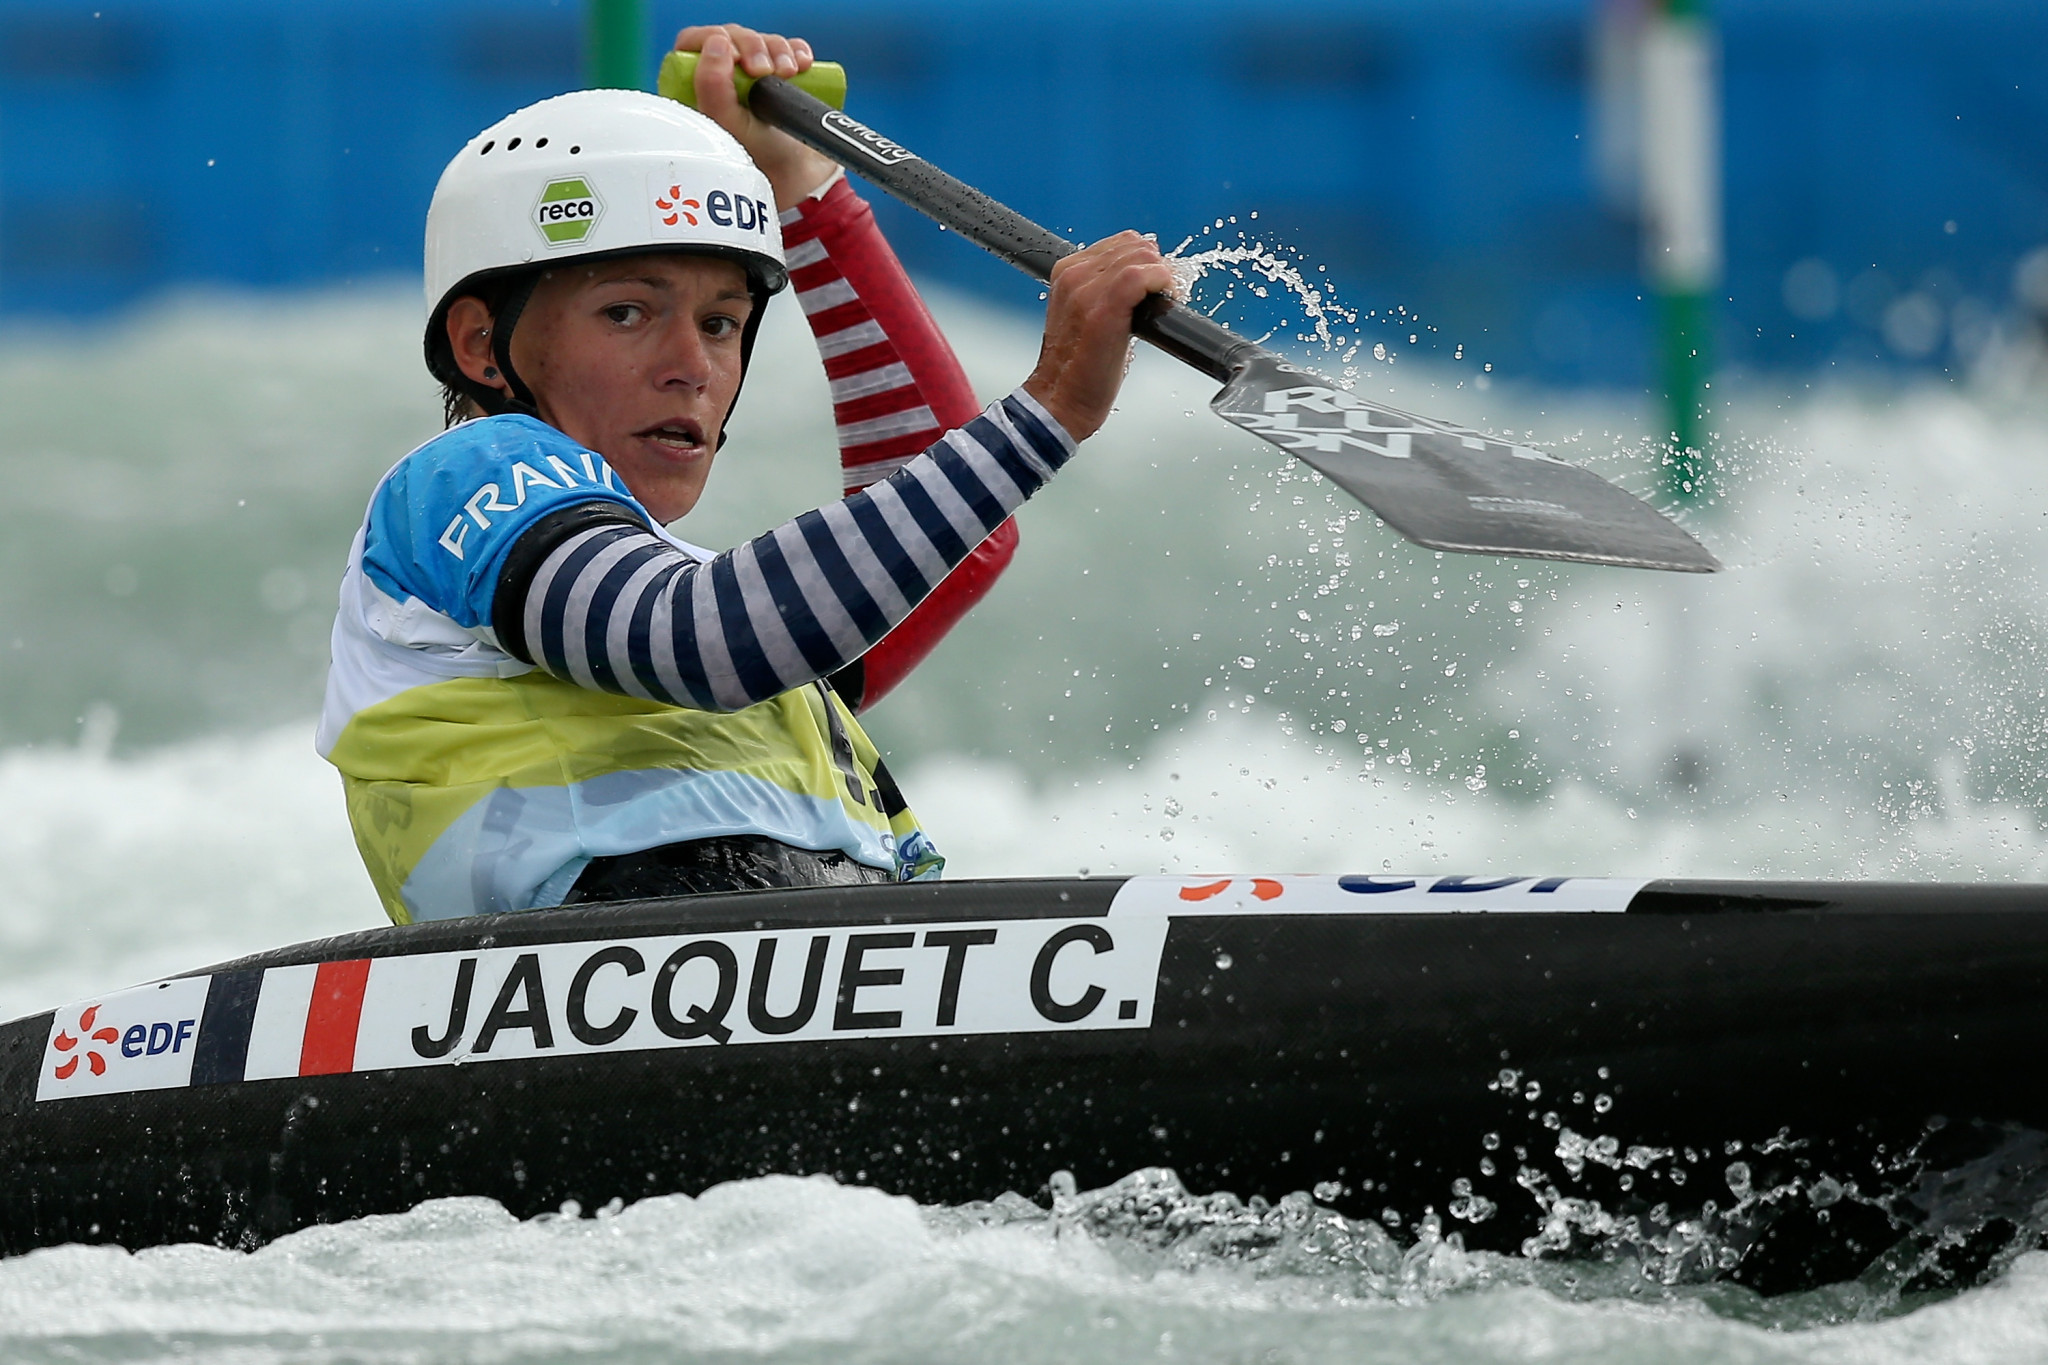 Jacquet and Málek claim victories in ICF Canoe Slalom World Cup in Bratislava